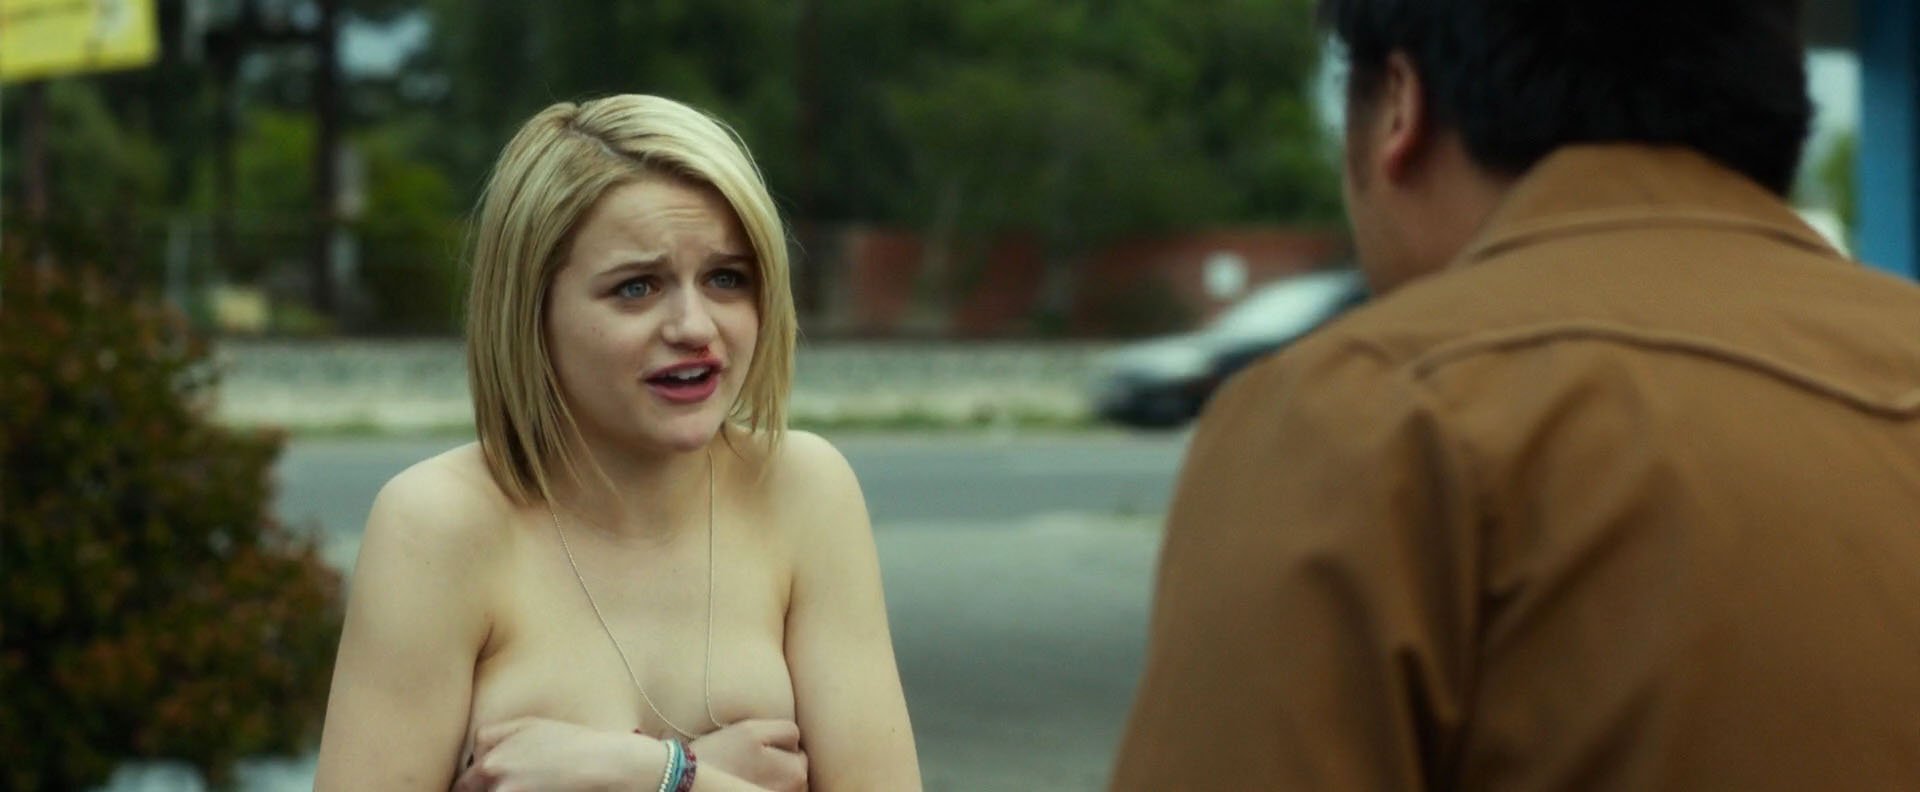 Young actress Joey King looks incredibly sexy in the interesting scene from...